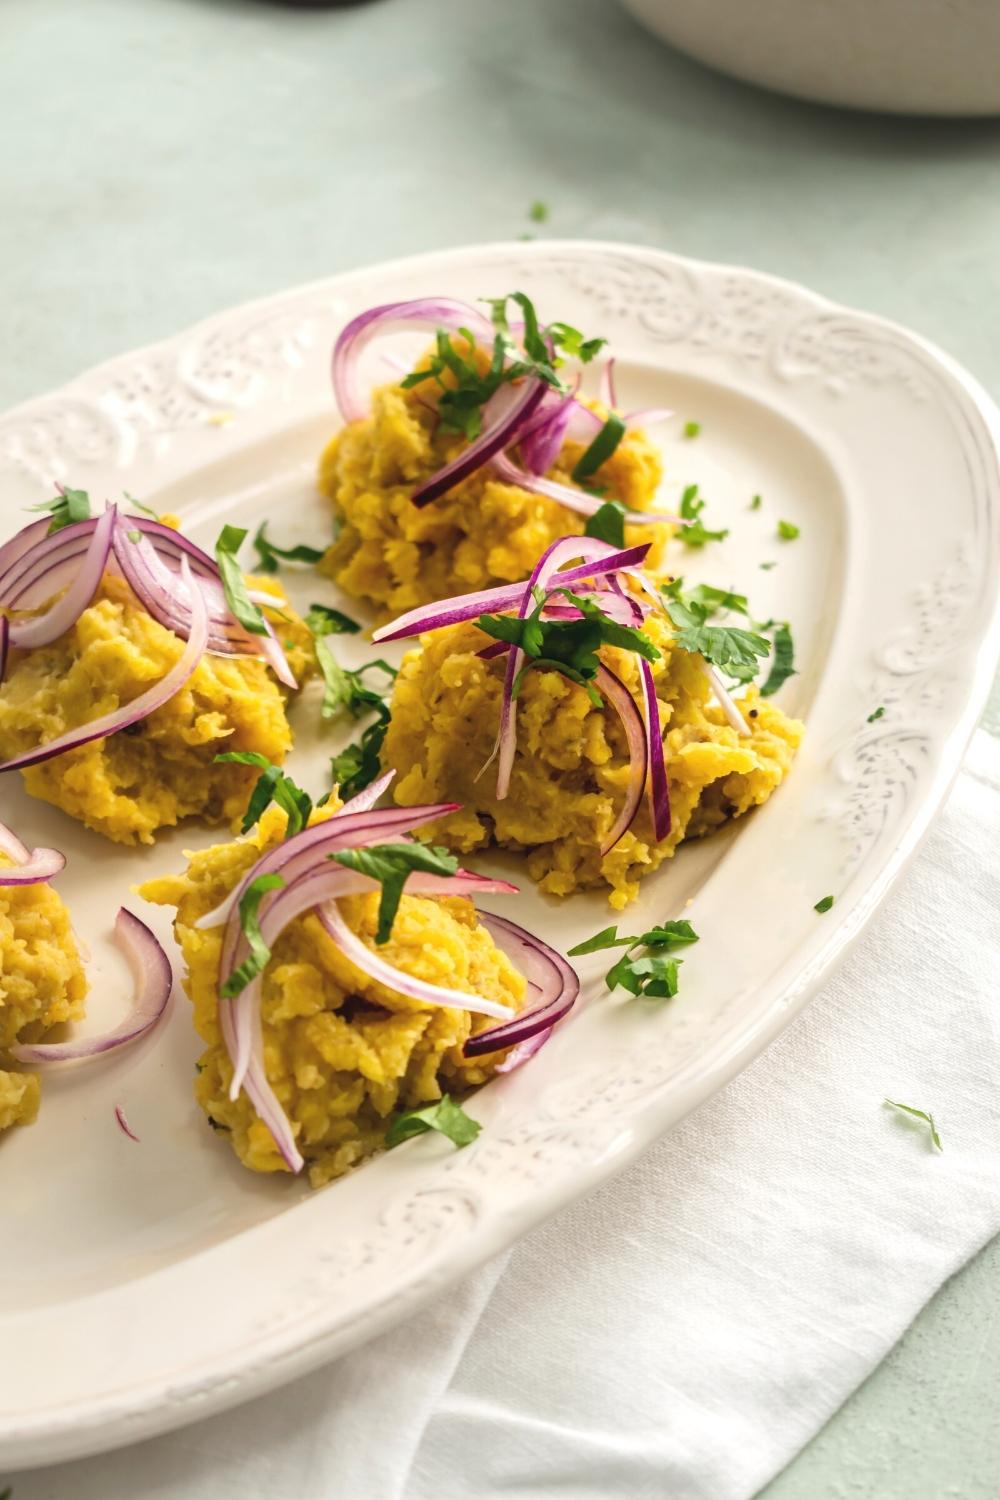 Four clumps of mashed plantains with chopped parsley and pickled red onion on top of it on a white plate.